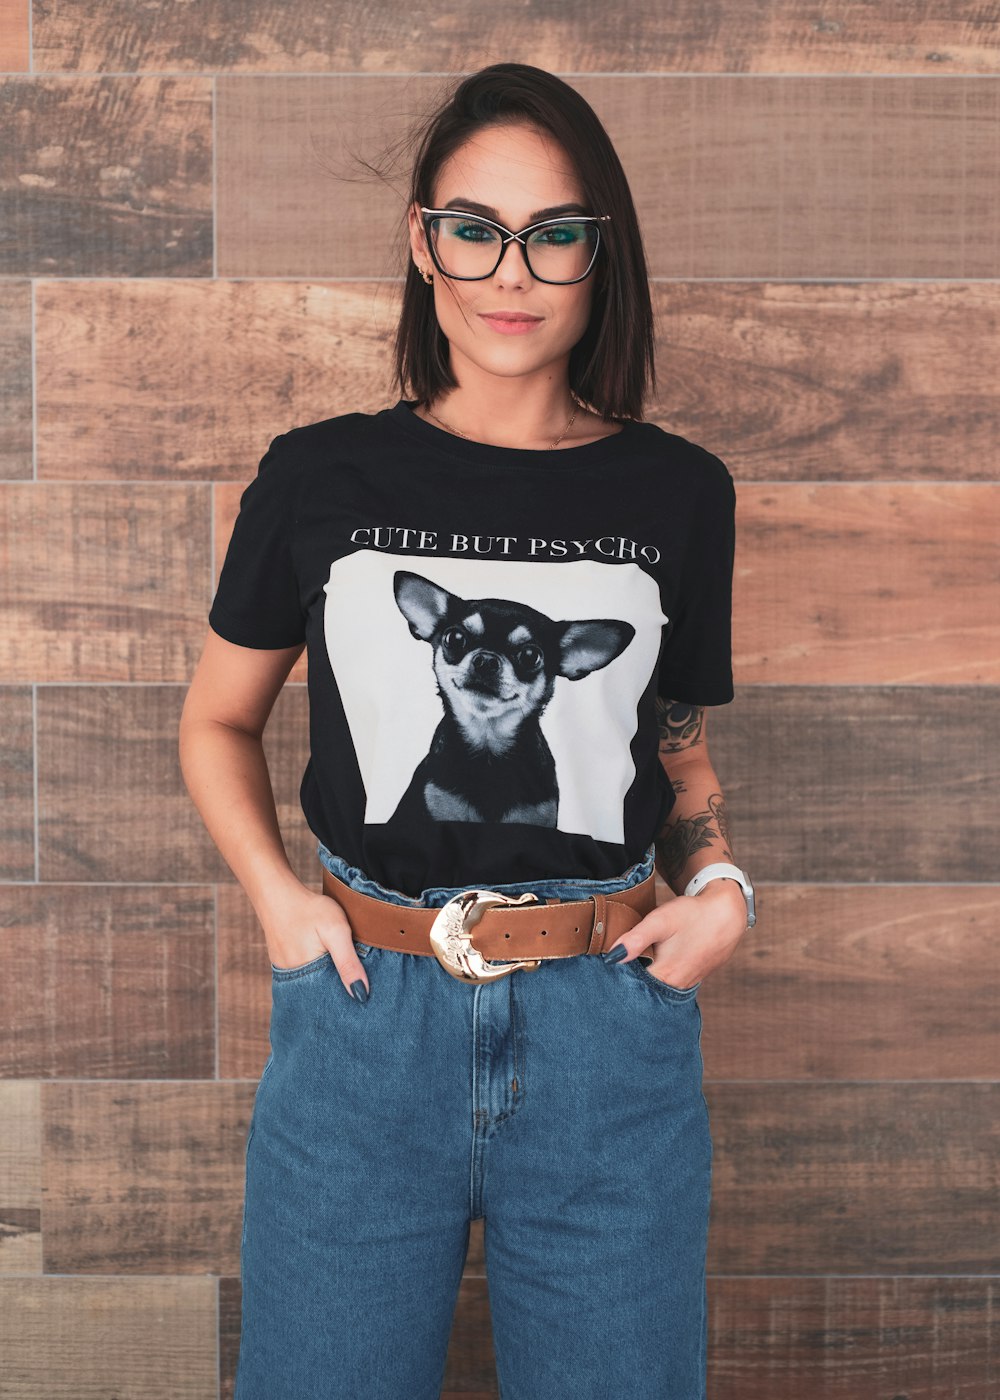 woman in black and white crew neck t-shirt and blue denim jeans wearing black sunglasses